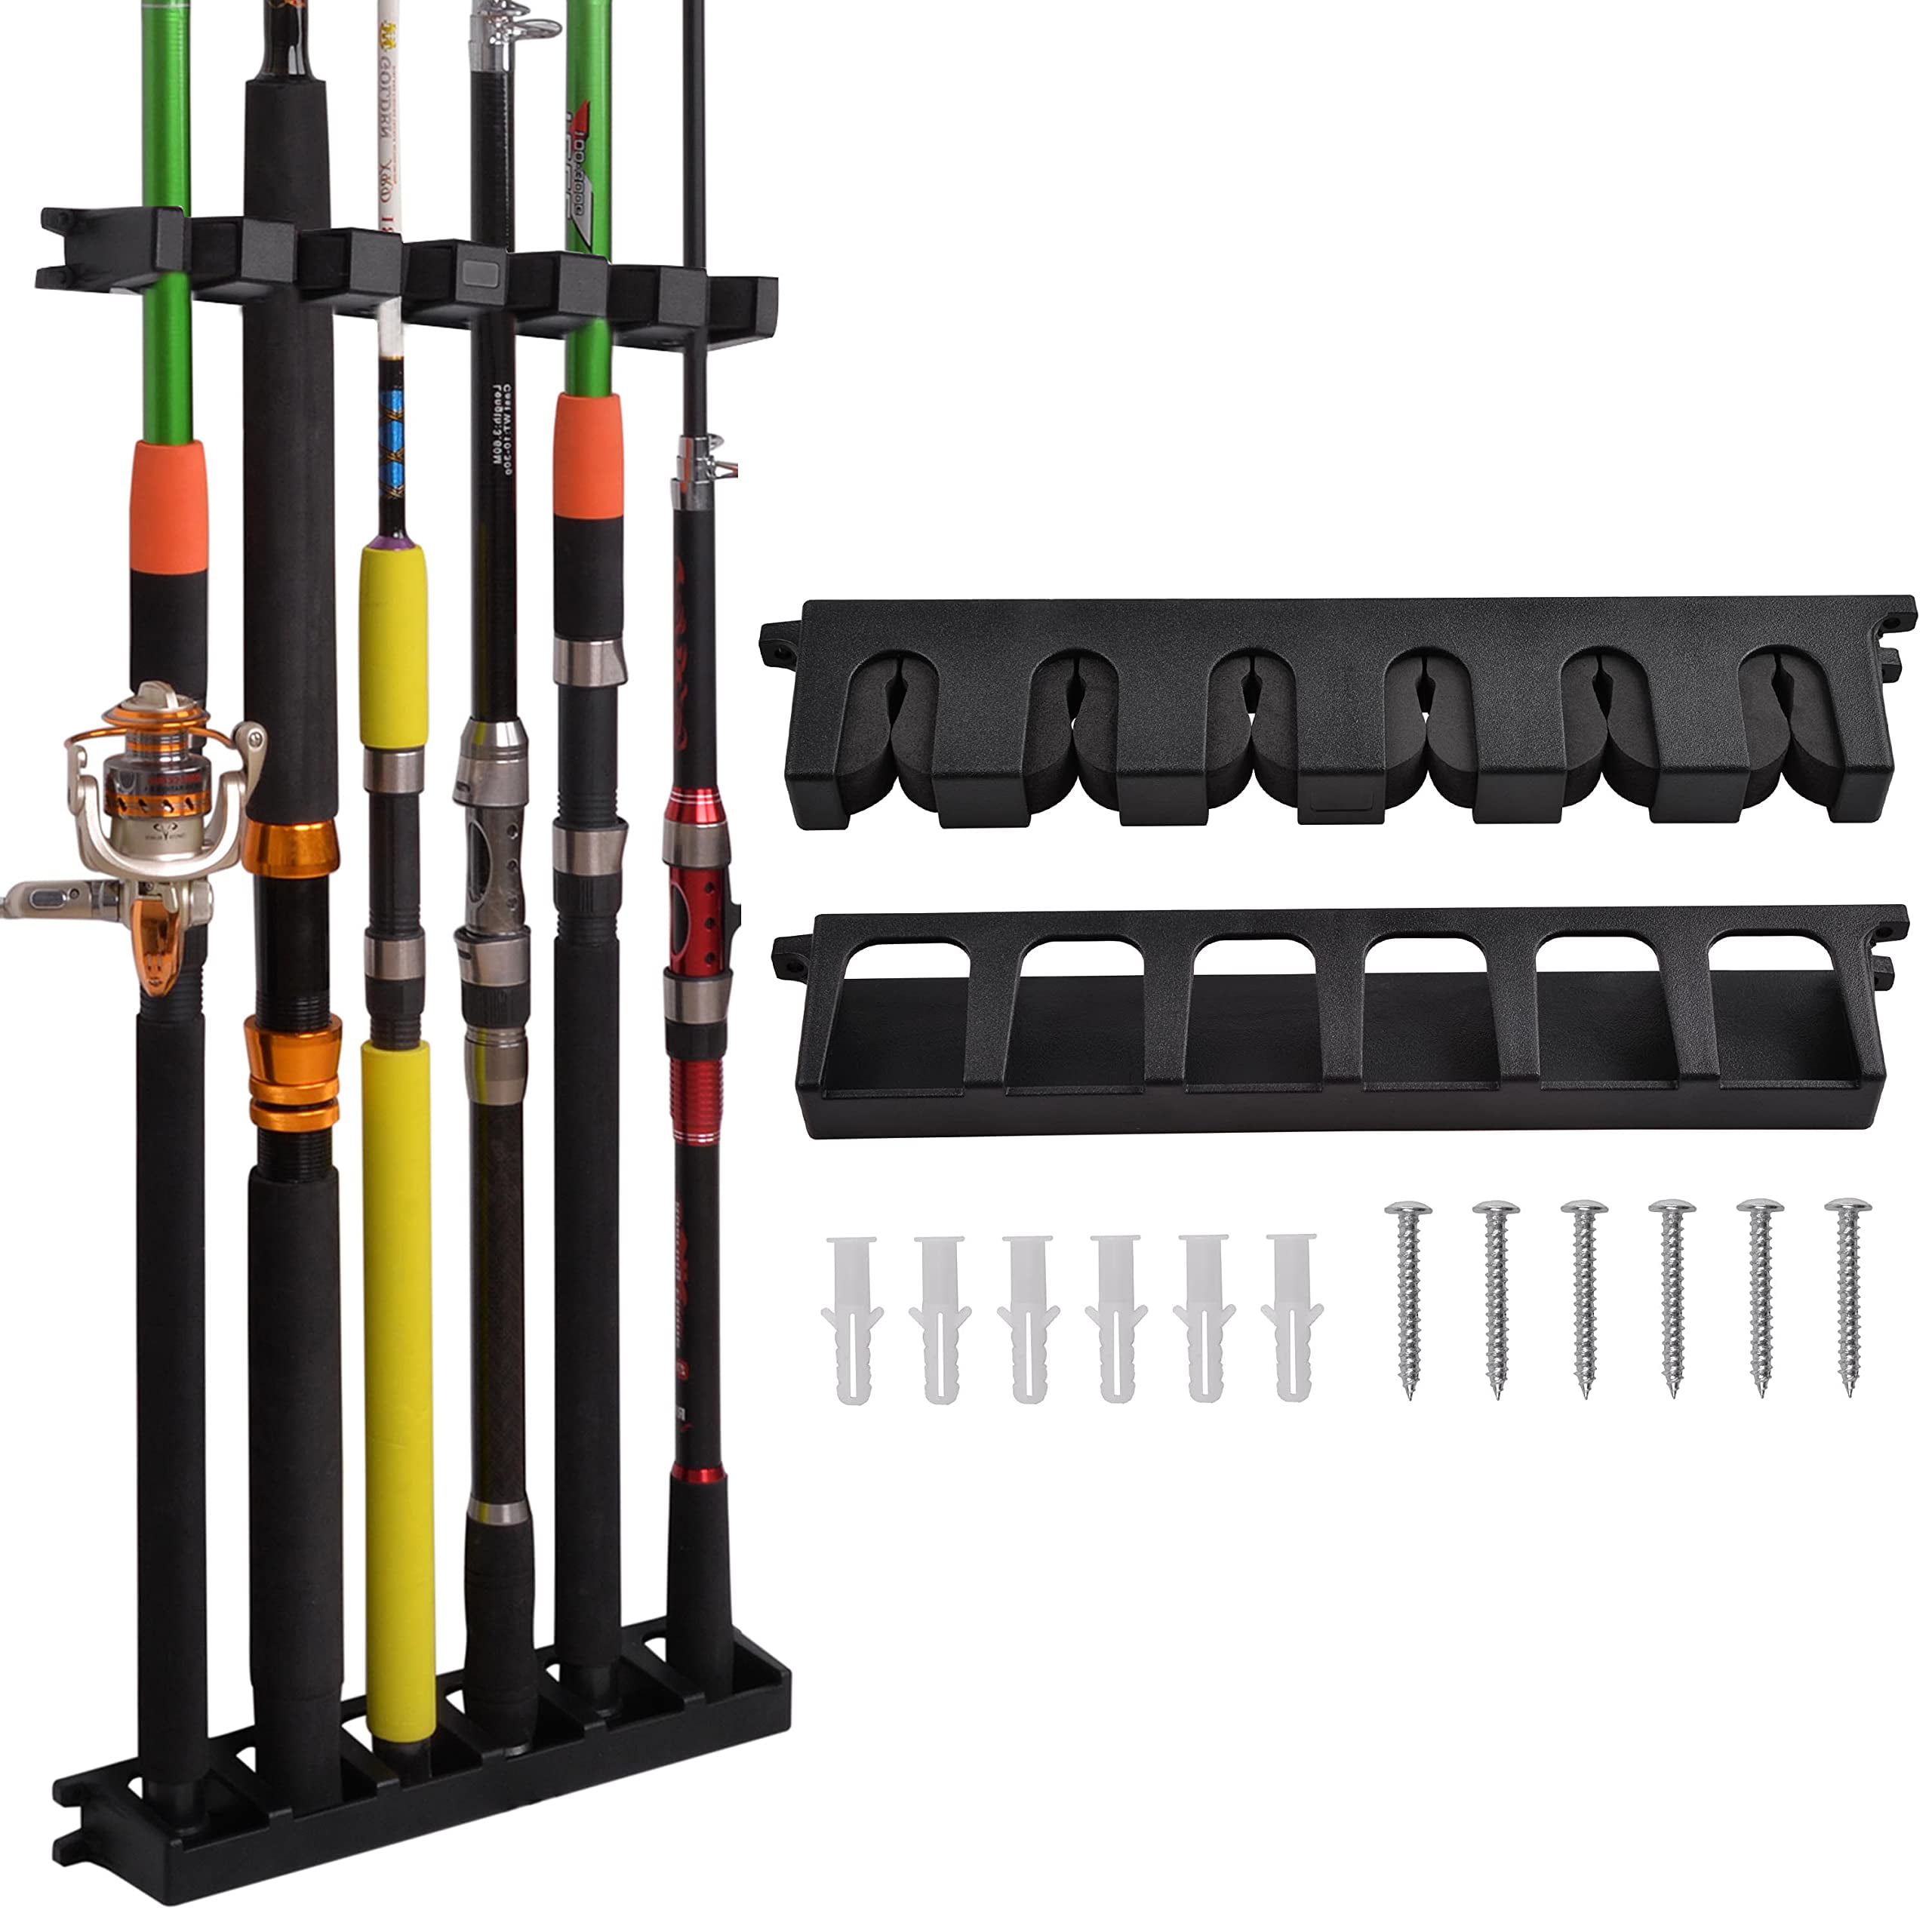 Vertical Fishing Rod Holders for Wall, Horizontal Fishing Rod Rack Wall  Mount Fishing Pole Holder for Garage Holds up to 6 Rods or Combos (Black  Small